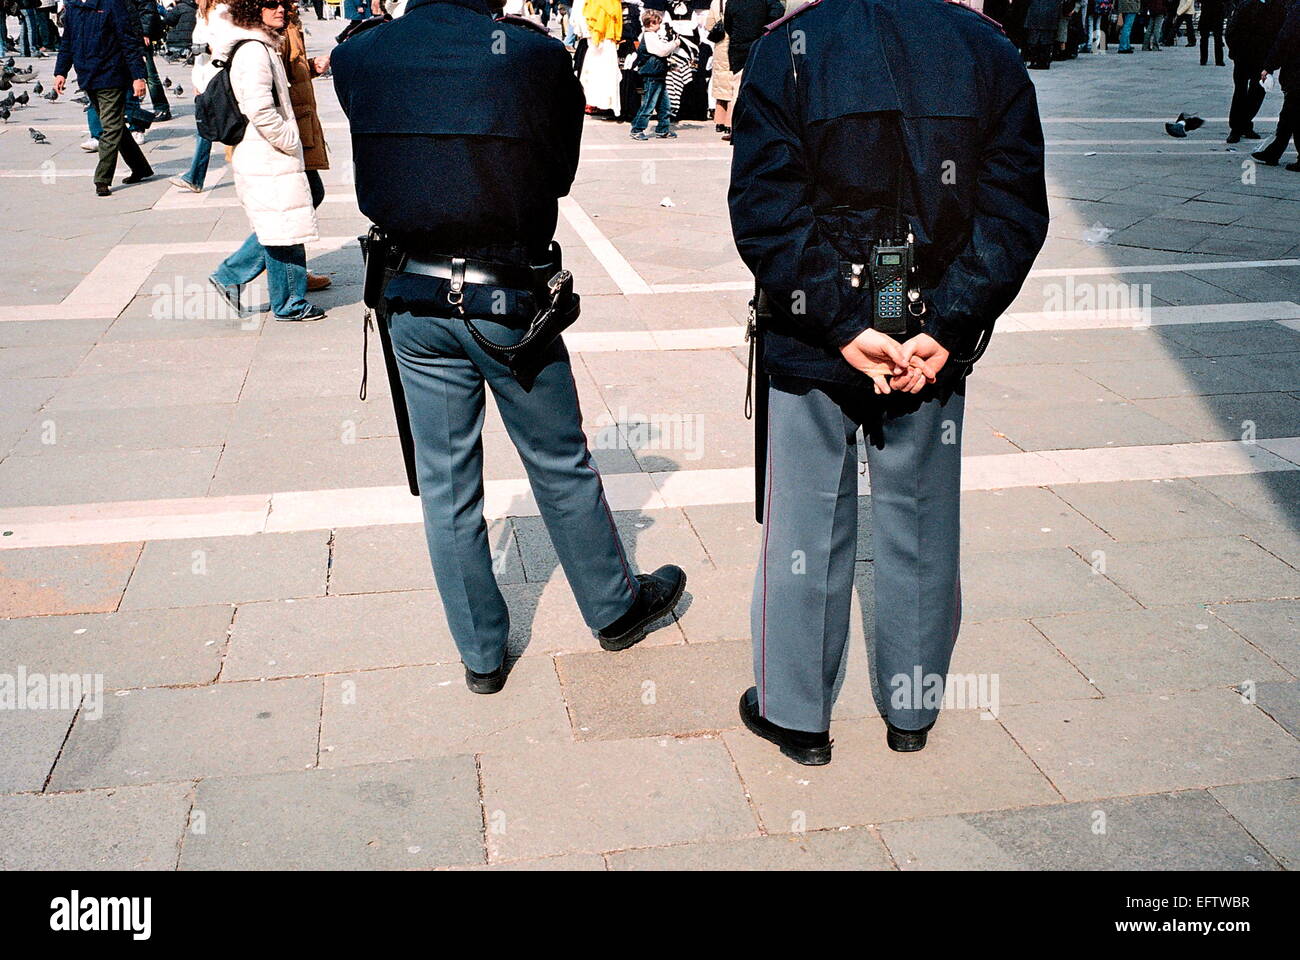 VENICE, ITALY - ITALIAN POLICE WATCHING TOURISTS ON THE PIAZZA SAN MARCO. PHOTO:JONATHAN EASTLAND REF:51011_1920A4290 Stock Photo